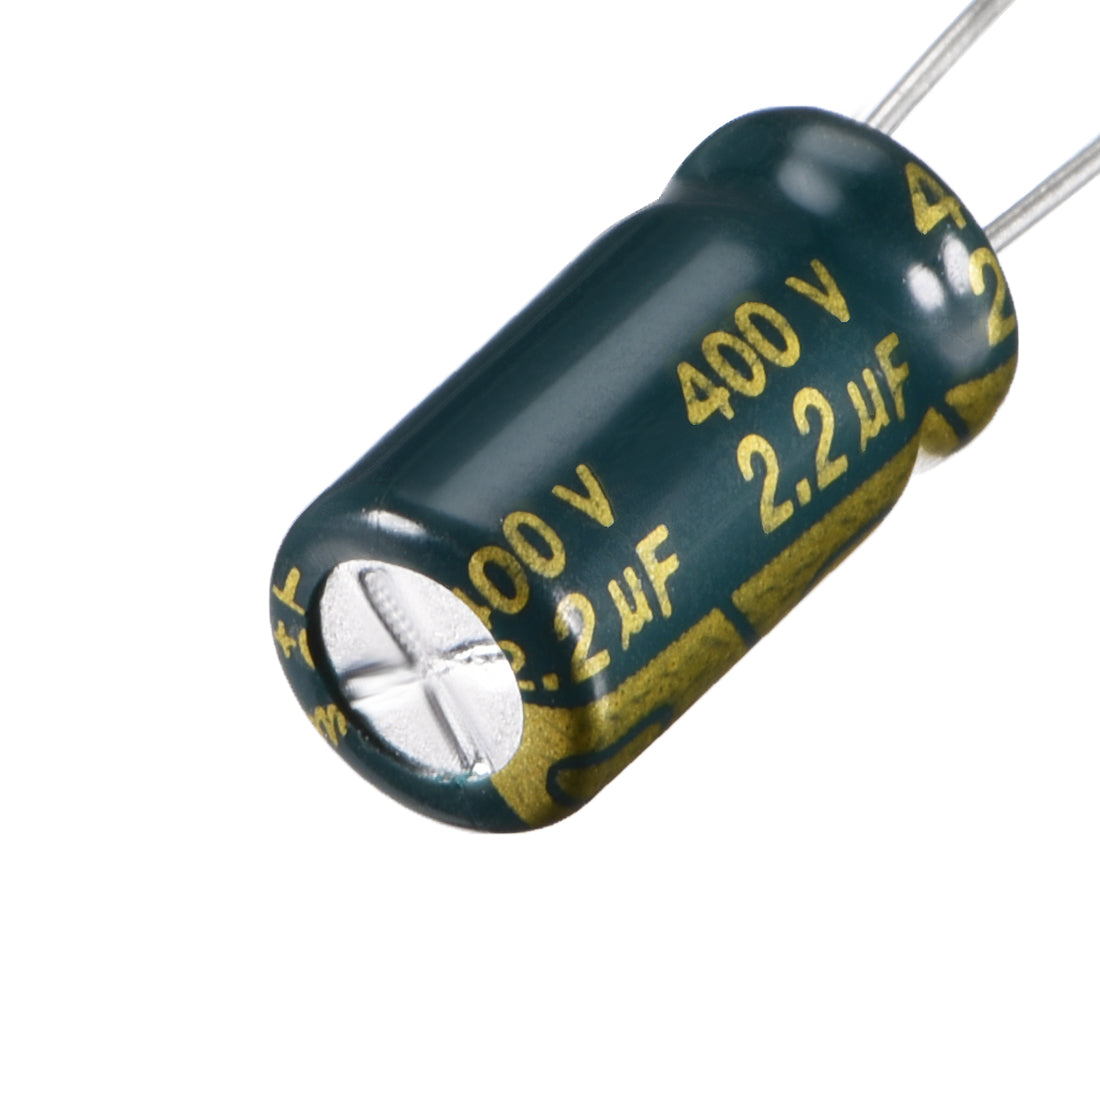 uxcell Uxcell Aluminum Radial Electrolytic Capacitor Low ESR Green with 2.2uF 400V 105 Celsius Life 3000H 6.3 x 12 mm High Ripple Current,Low Impedance 20pcs